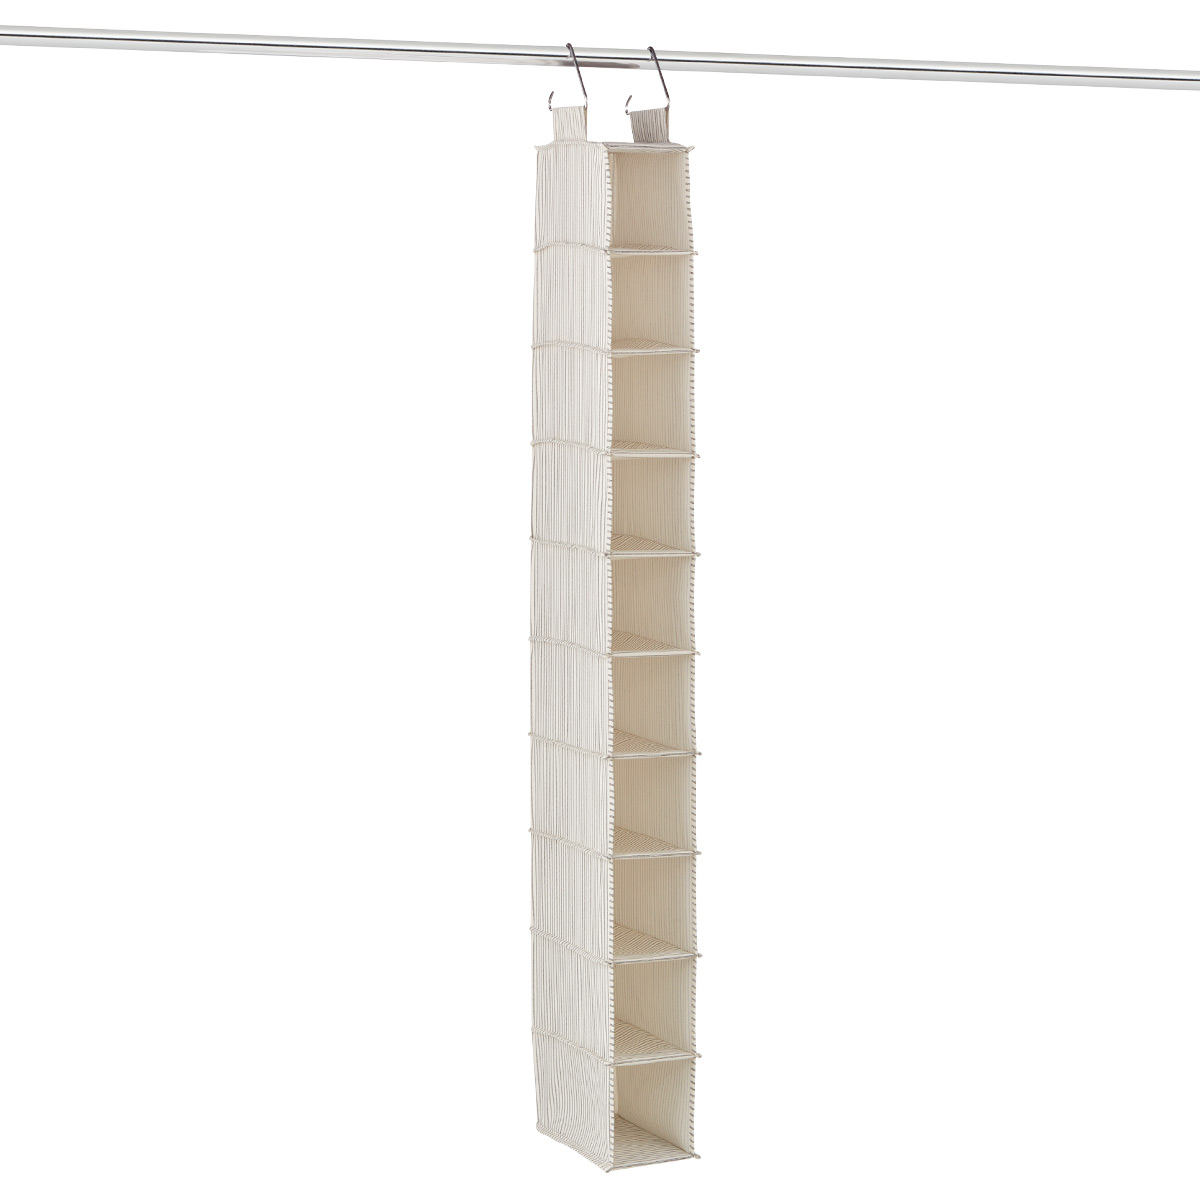 https://www.containerstore.com/catalogimages/482699/10091531-10-compartment-hanging-shoe.jpg